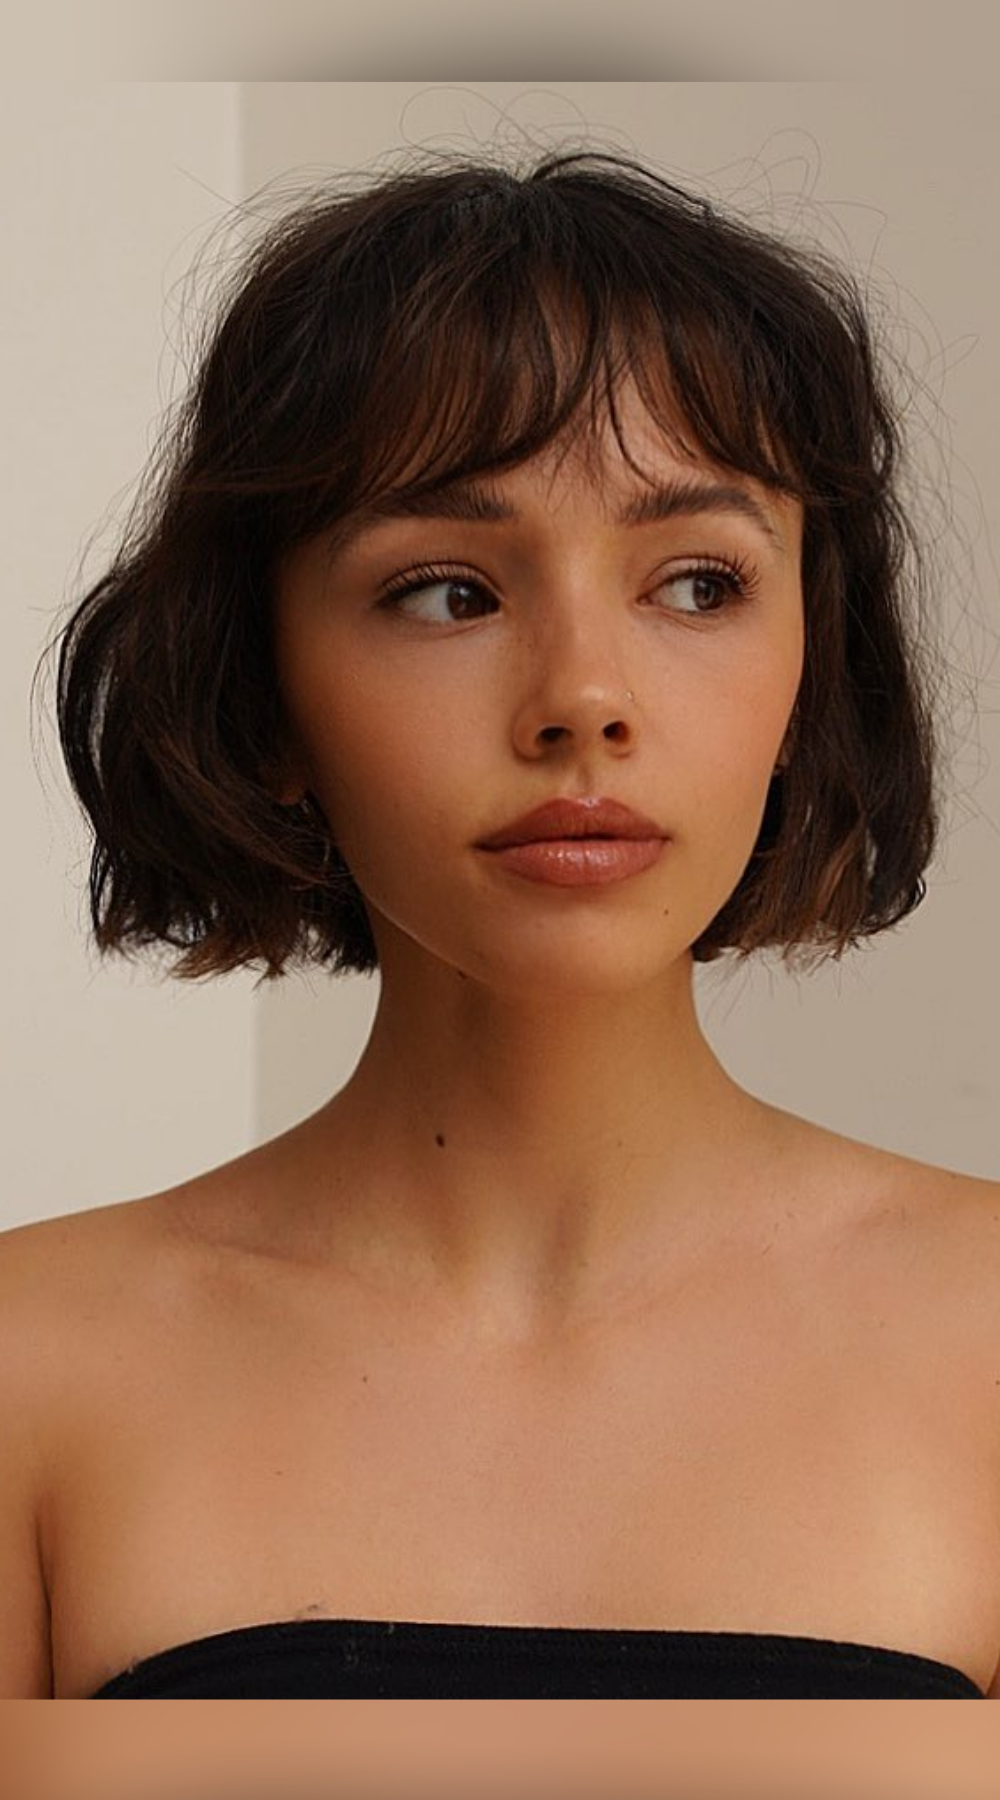 Stylish Ways to Rock Short Hair: Tips and Tricks for Chic Looks